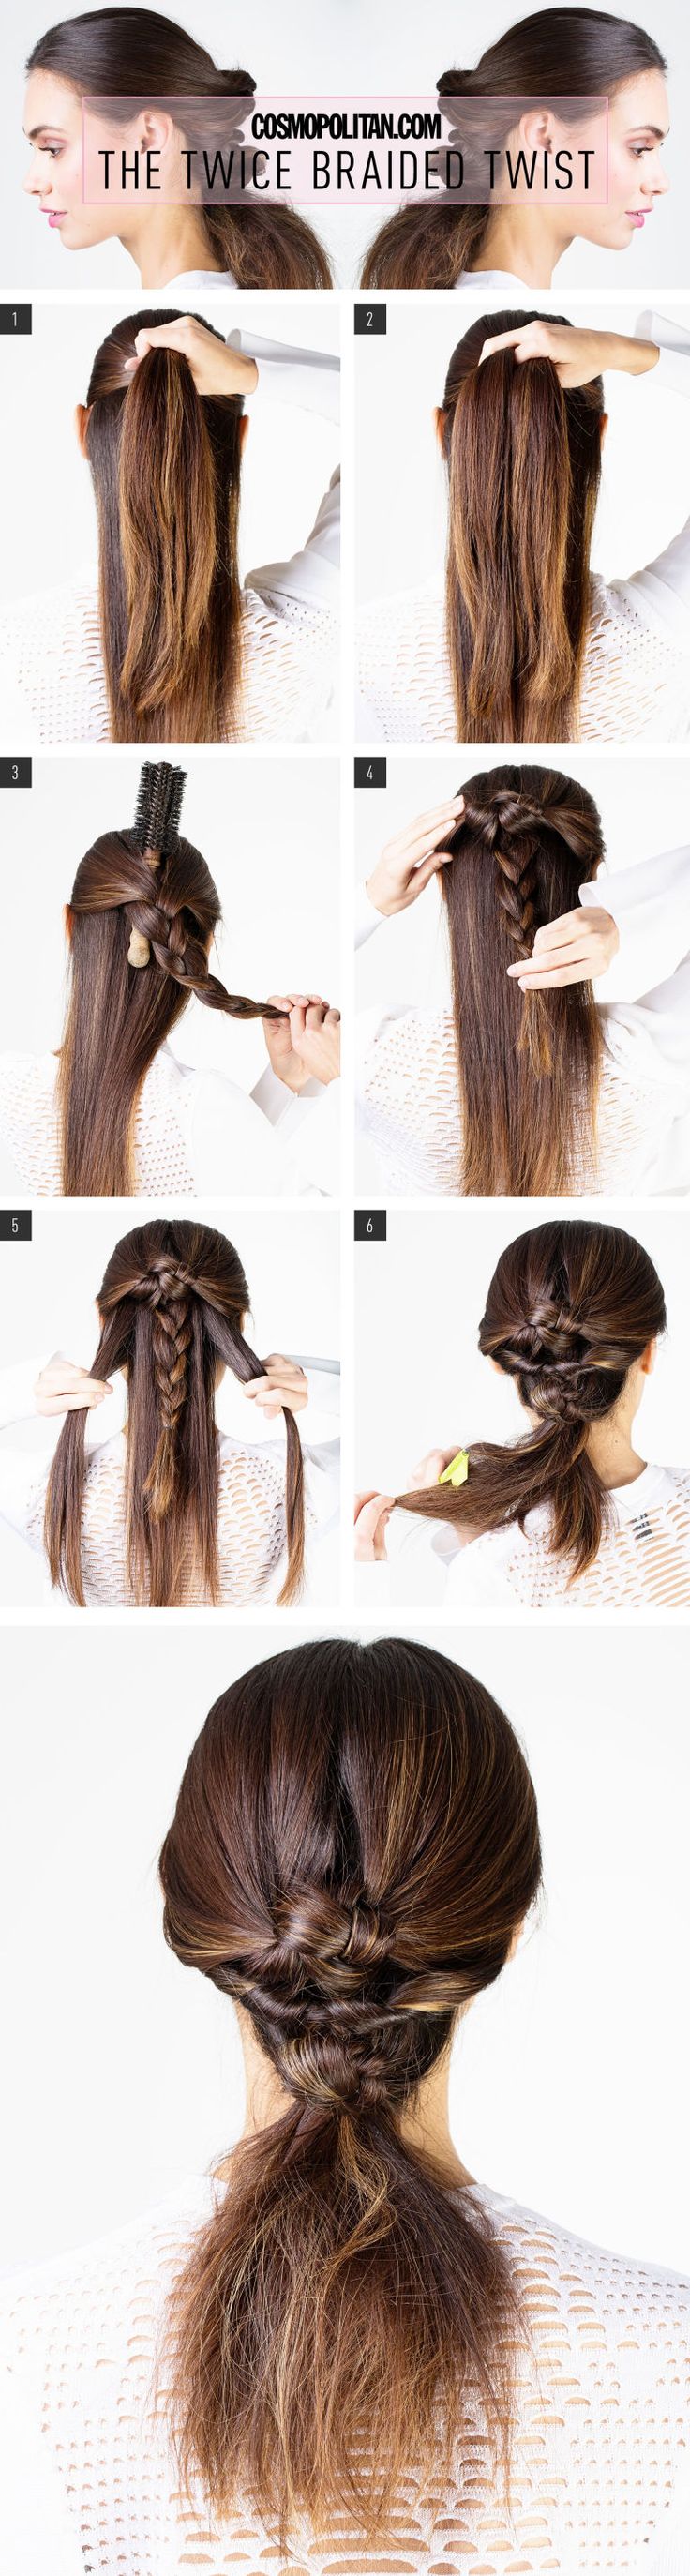 Twisted braid "width =" 458 "class =" size-full wp-image-43096